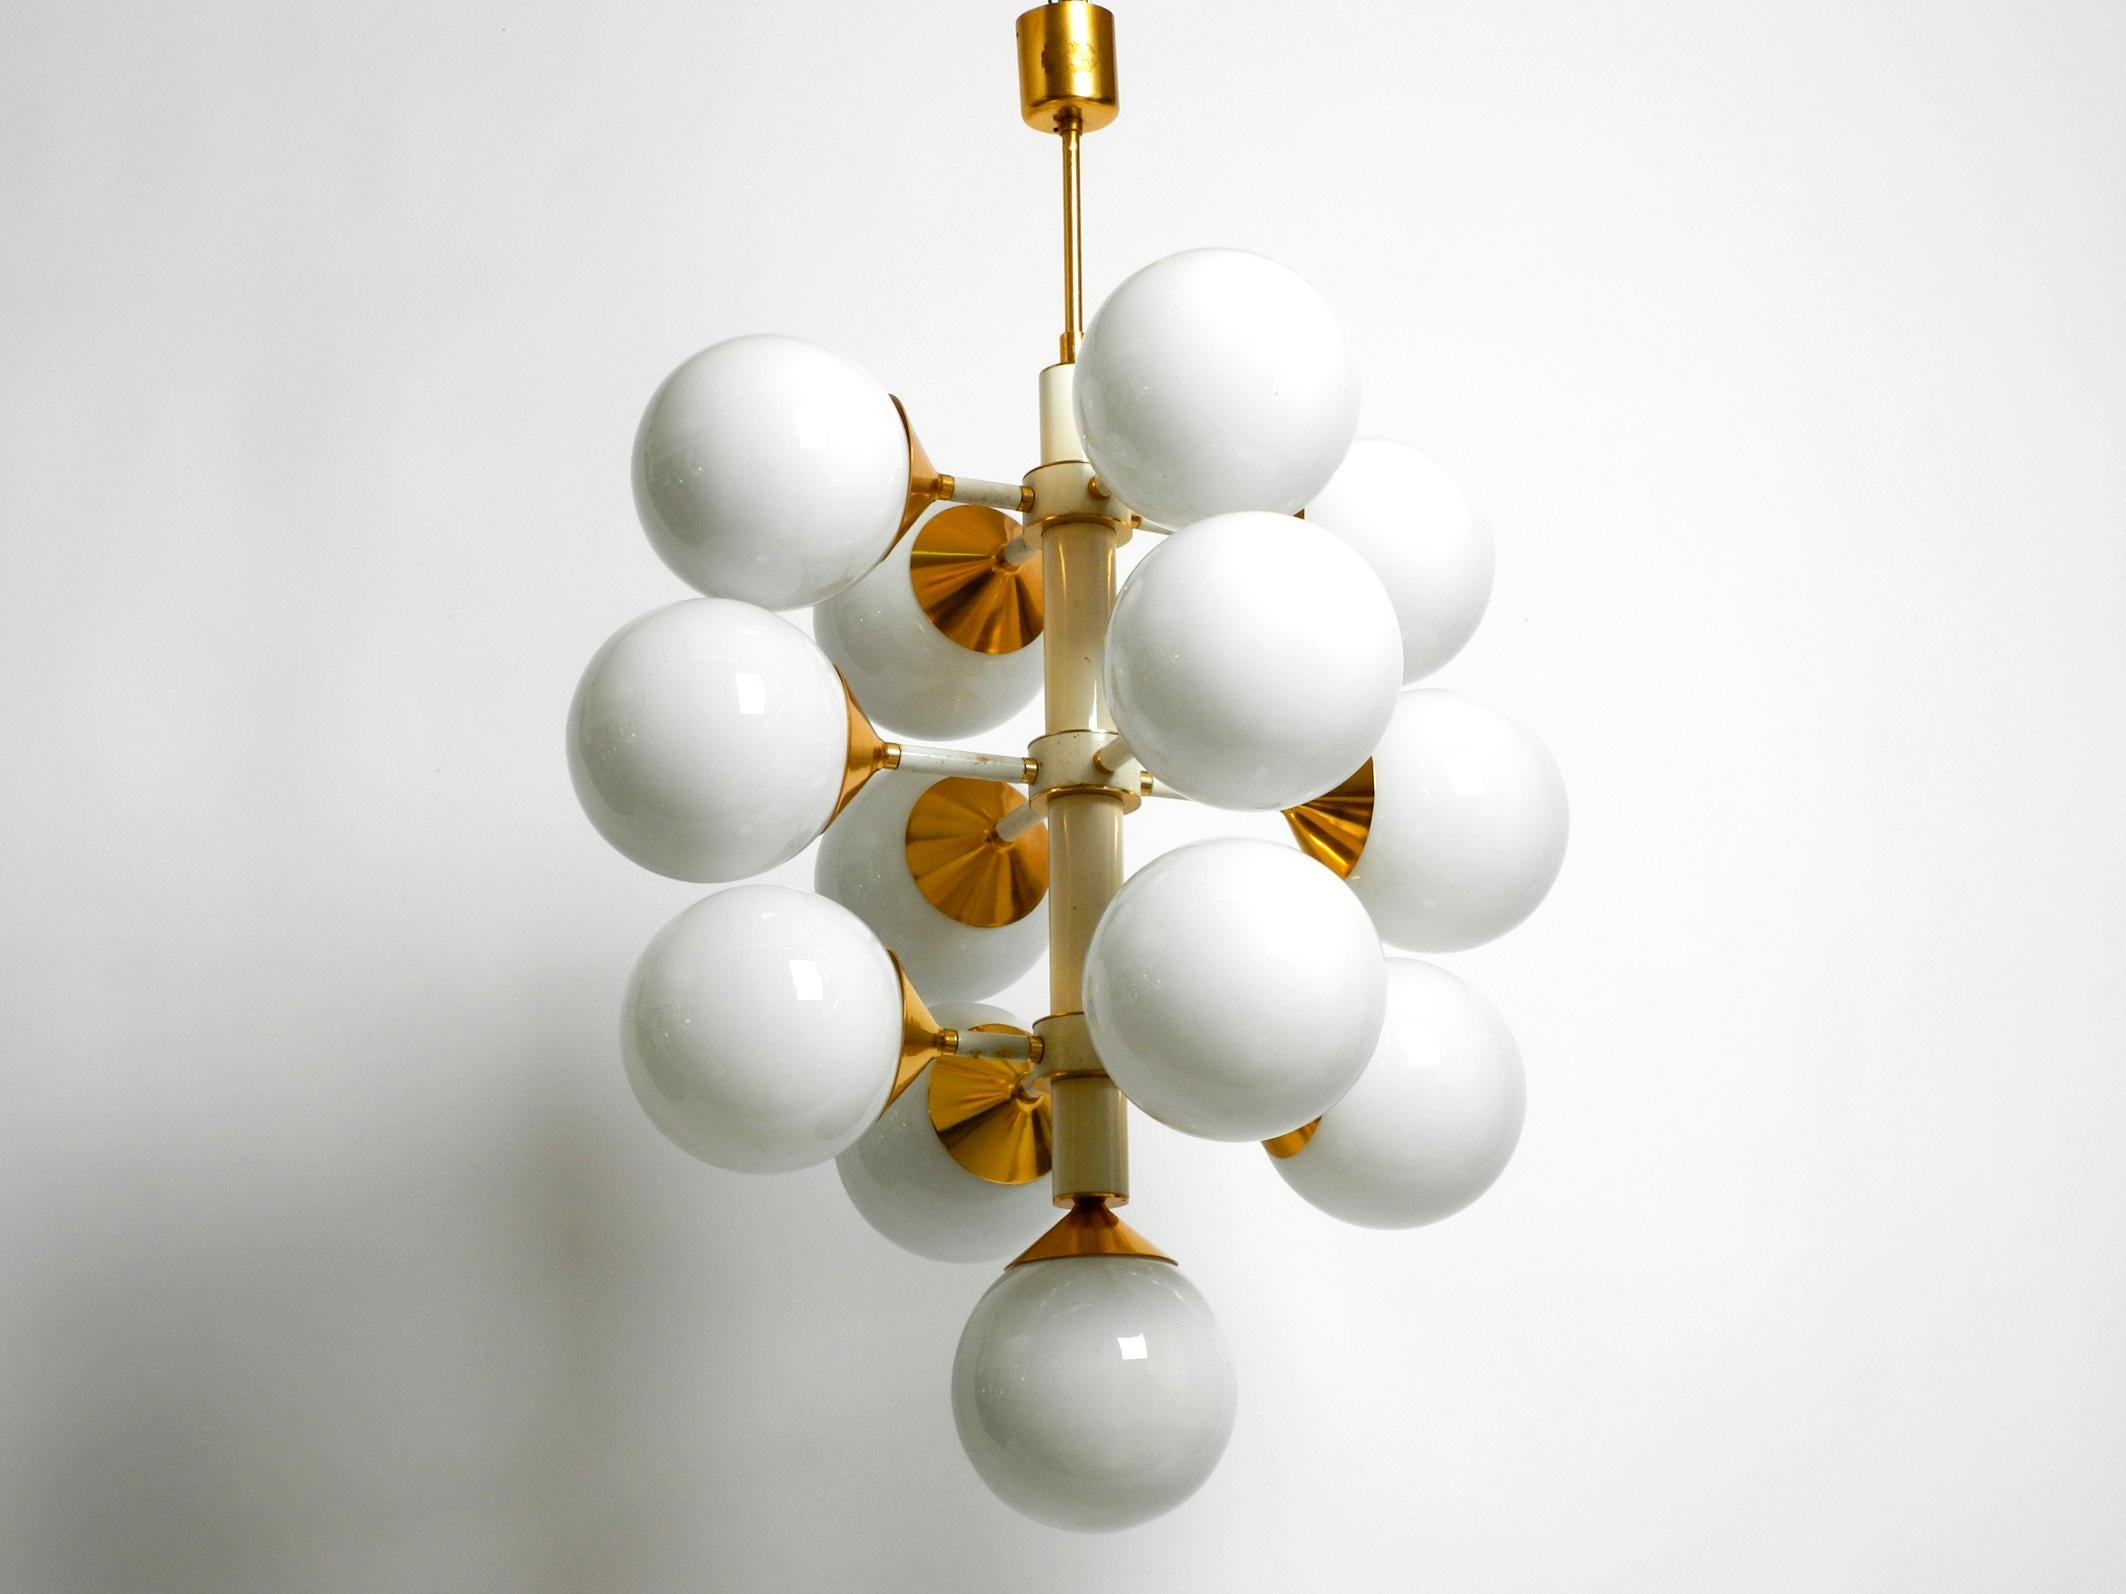 European Rare Large 1960's Space Age Brass Ceiling Lamp with 13 White Glass Spheres For Sale